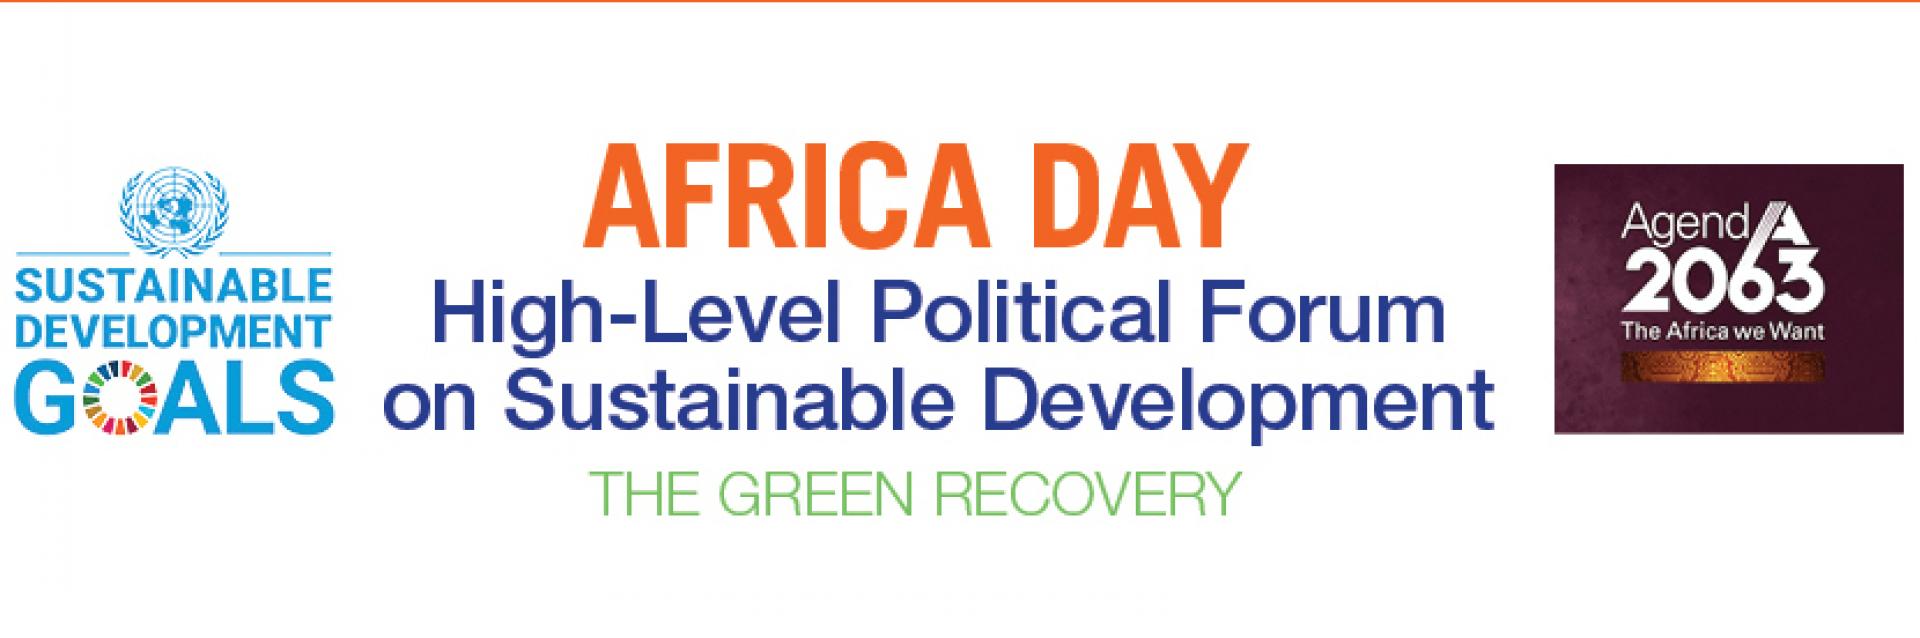 Africa Day at the High-level Political Forum on Sustainable Development